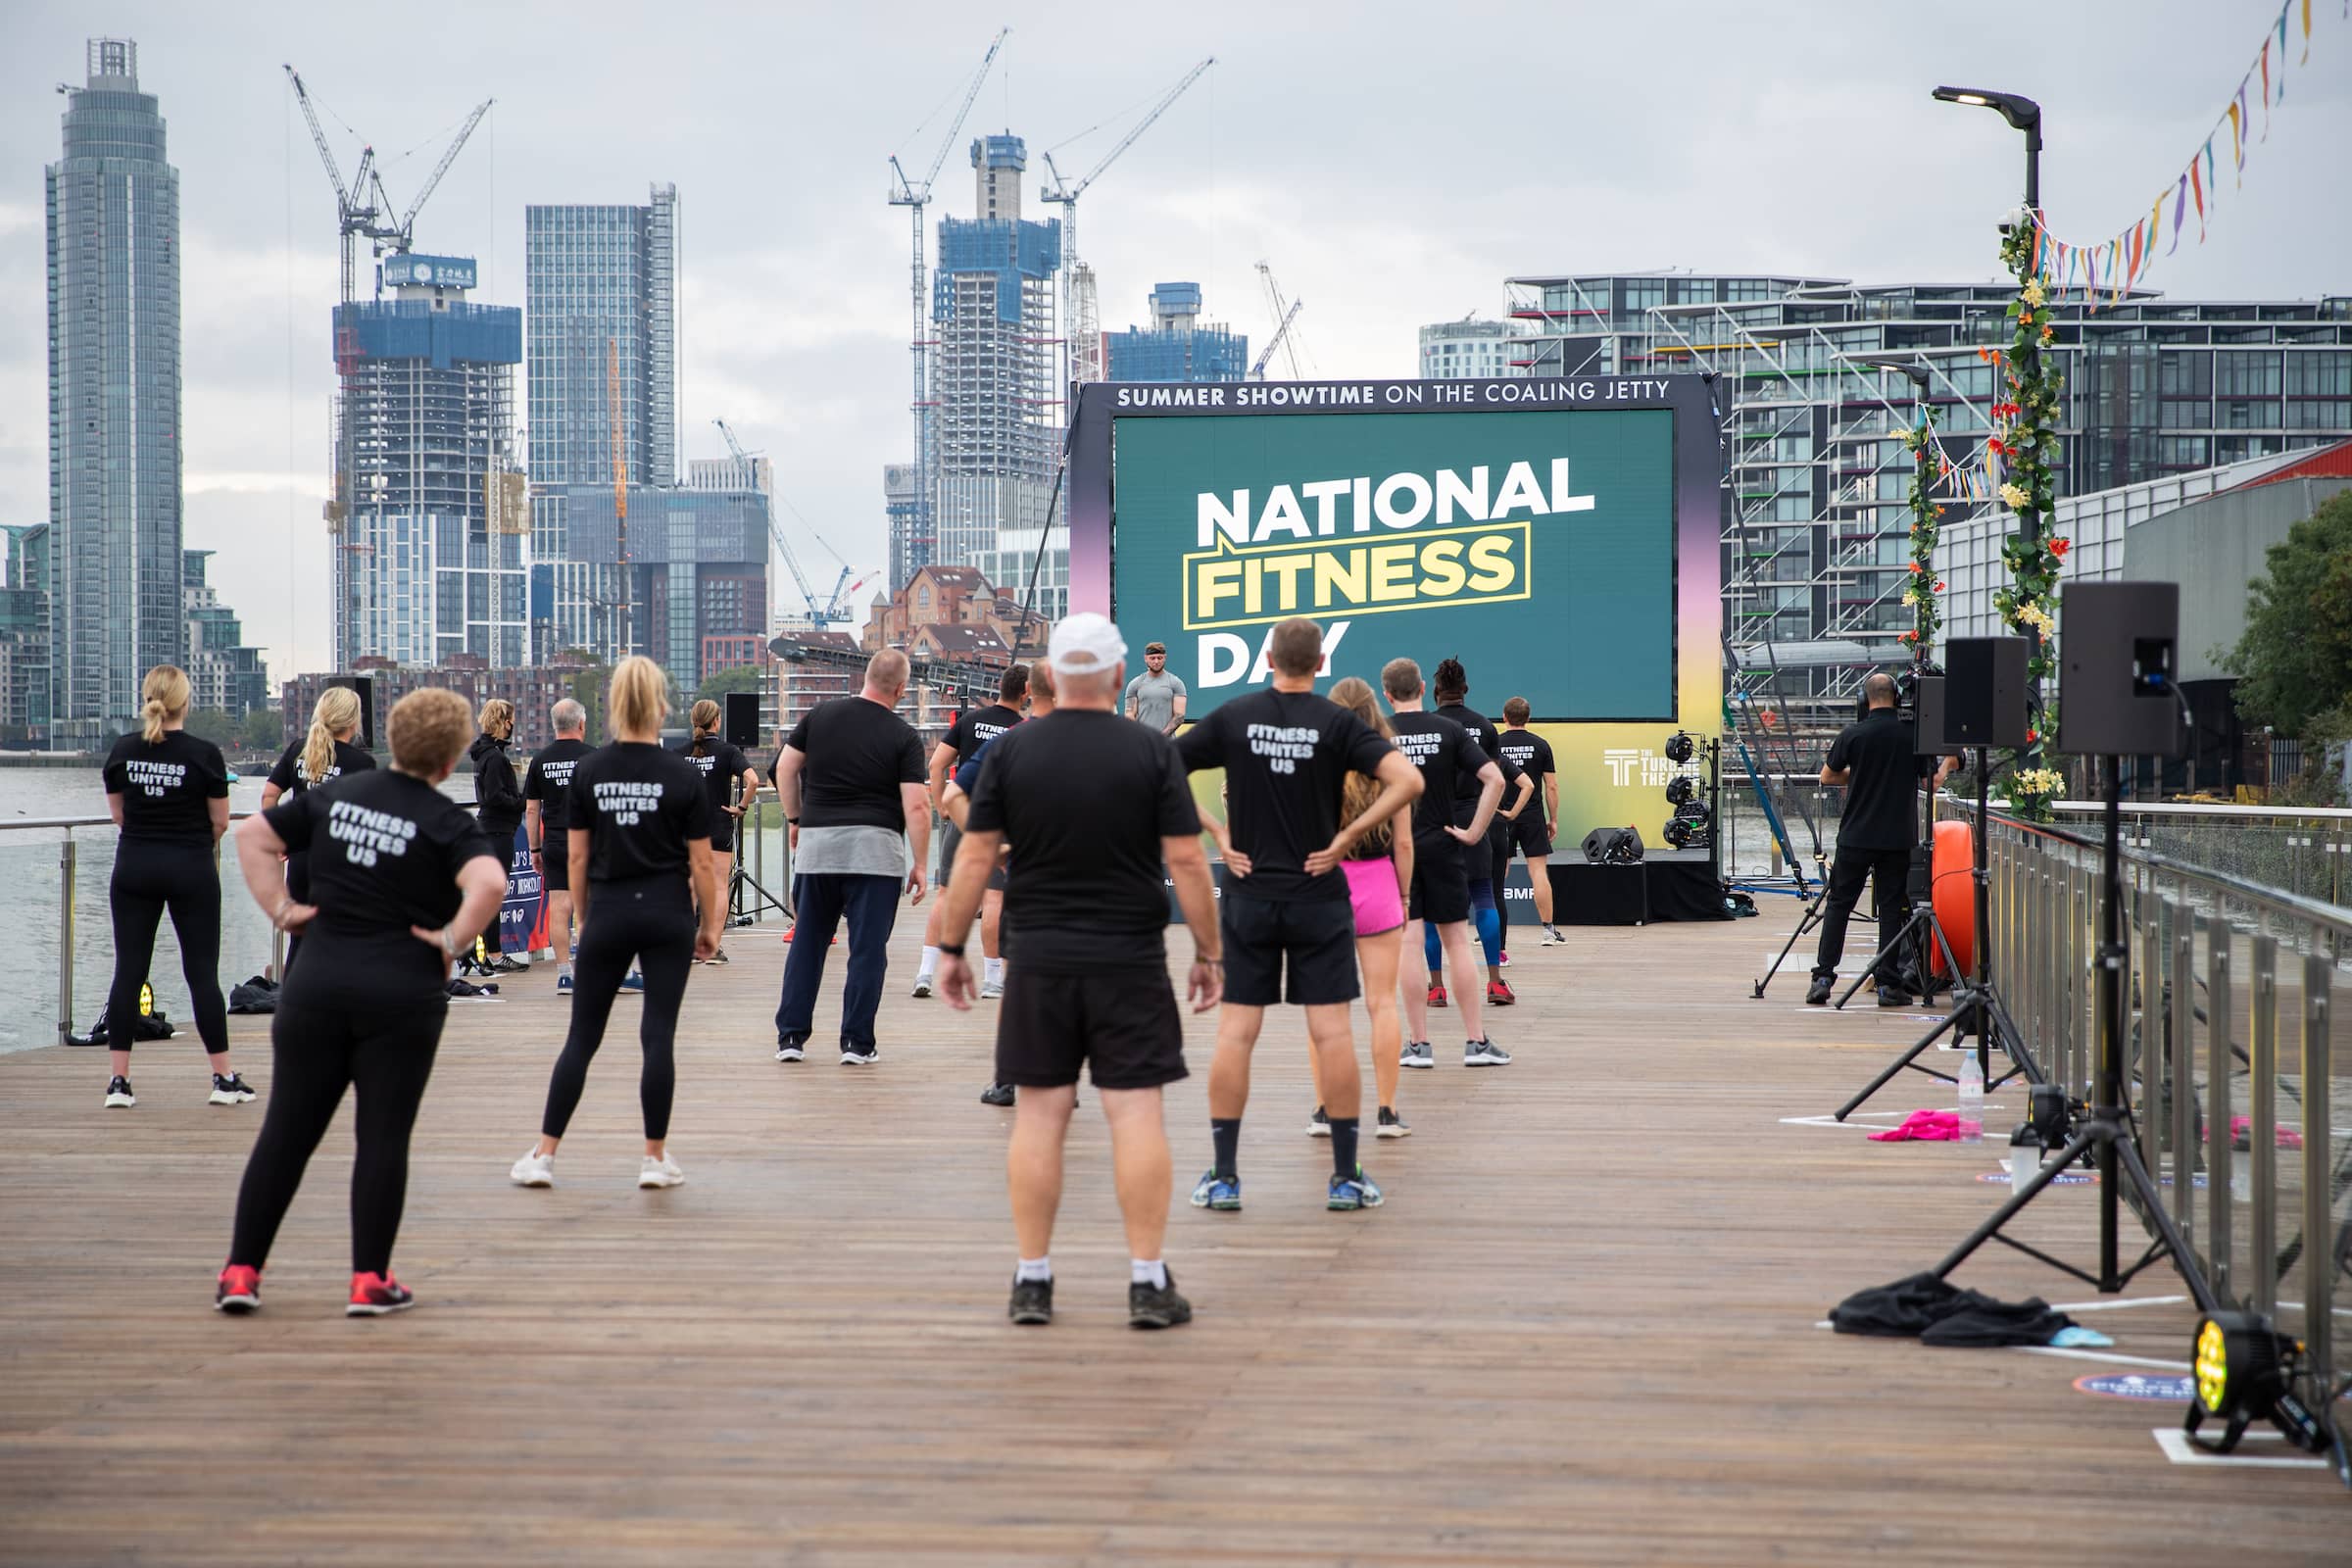 National fitness day london